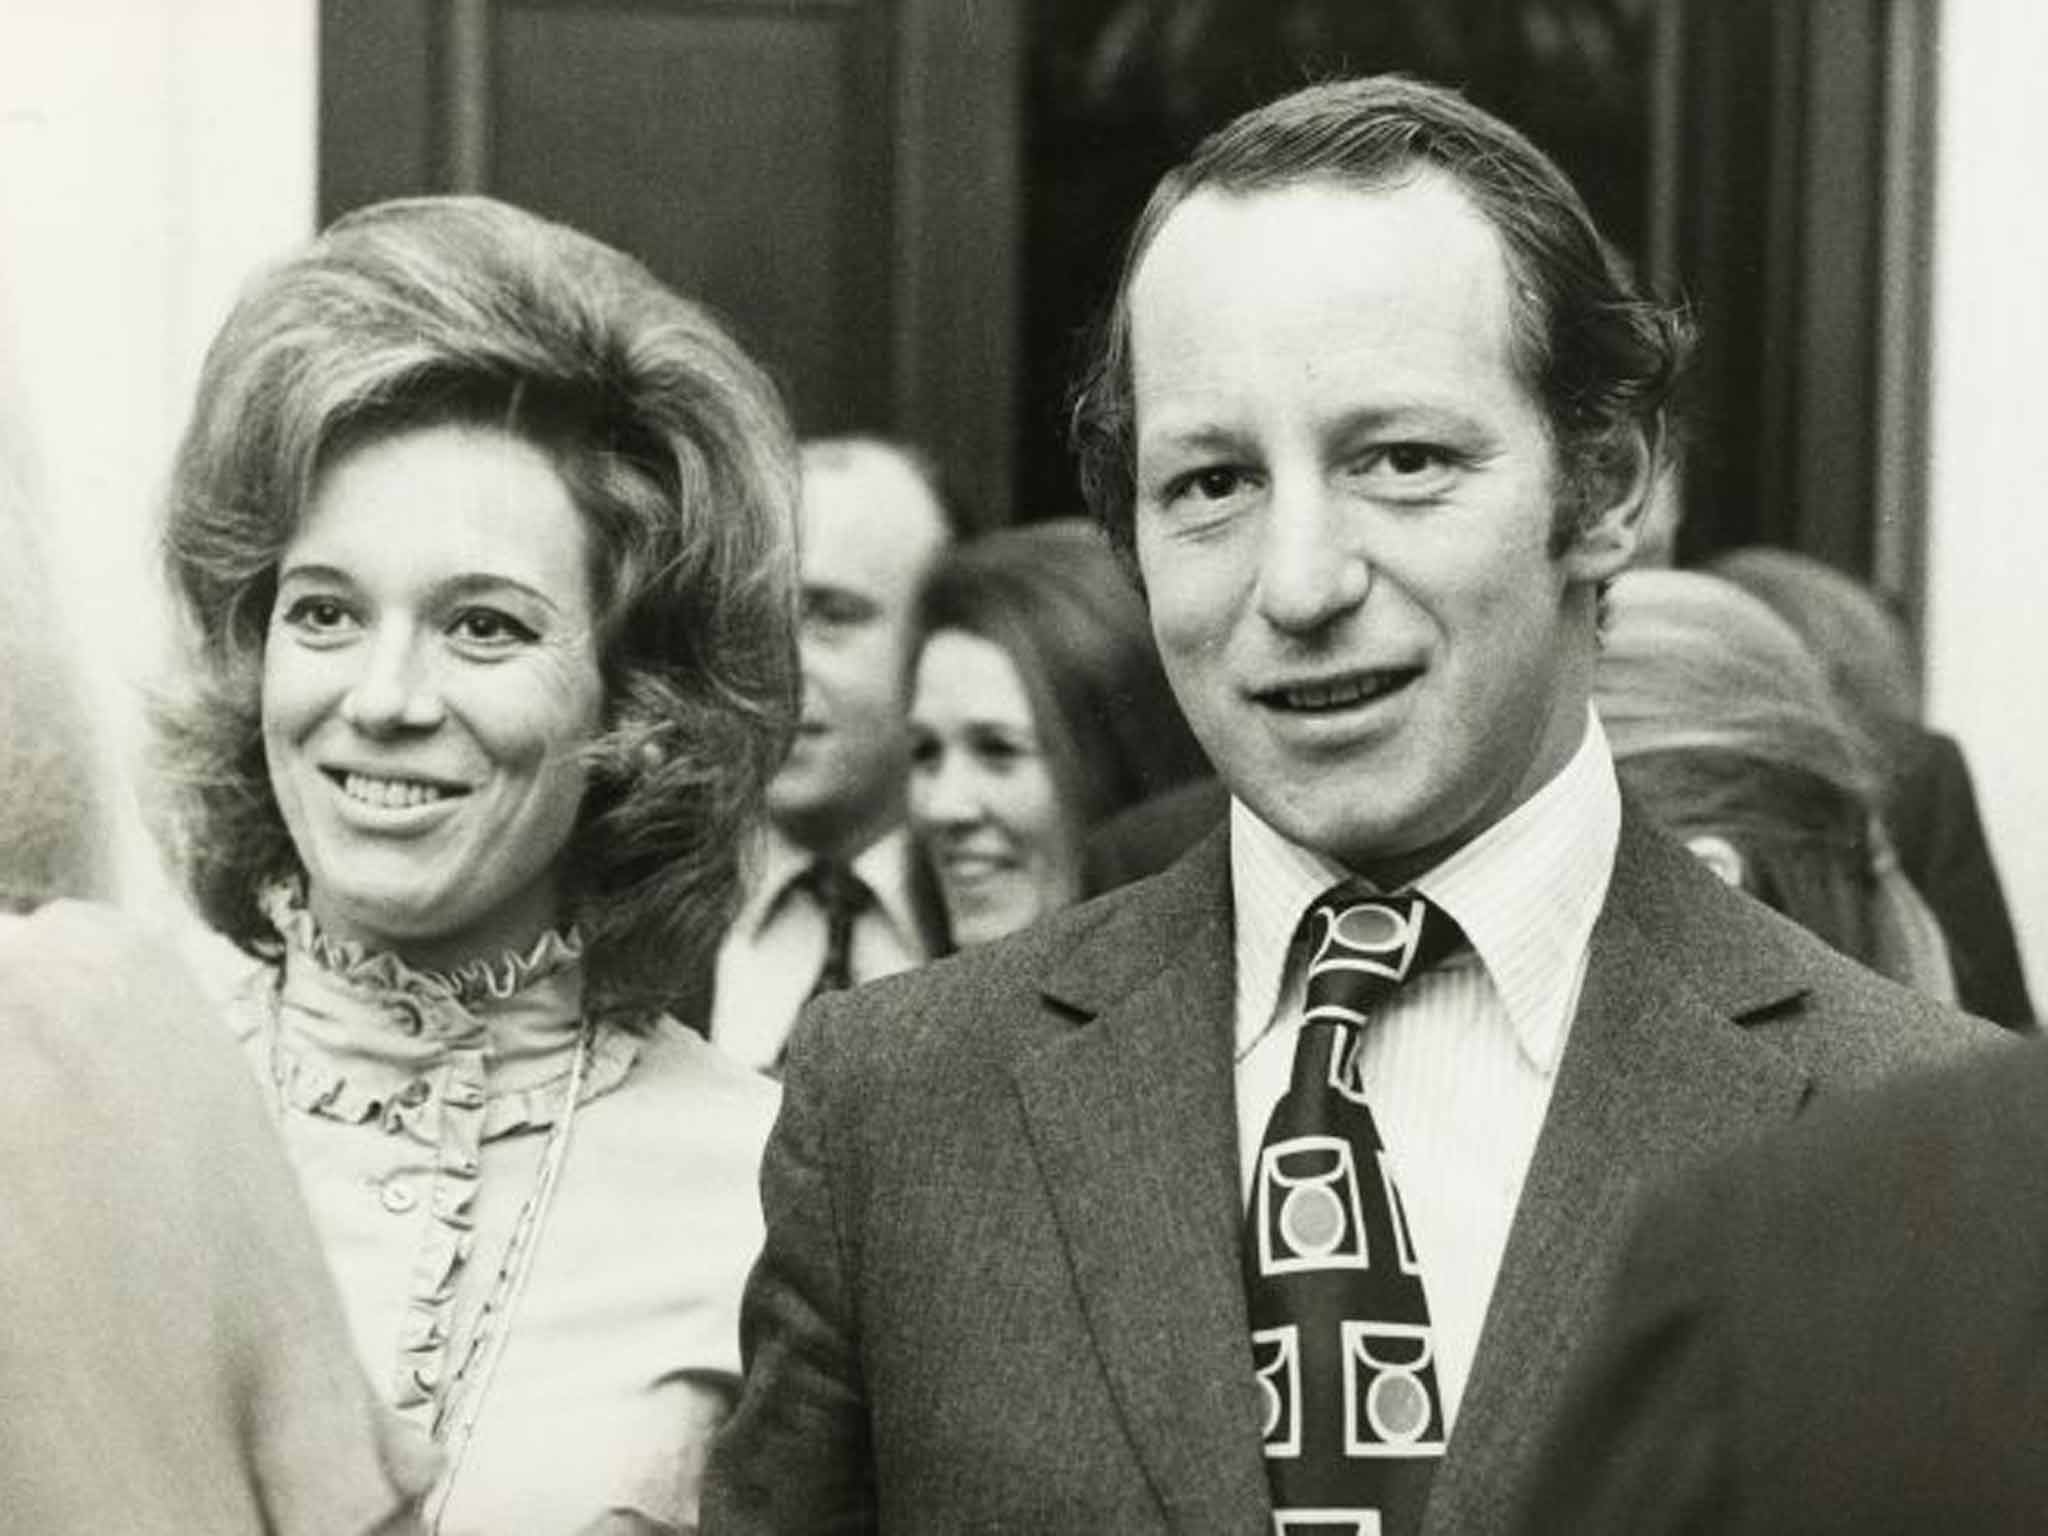 Shand Kydd and his wife Christine in 1971; she appeared to tolerate his extramarital activities